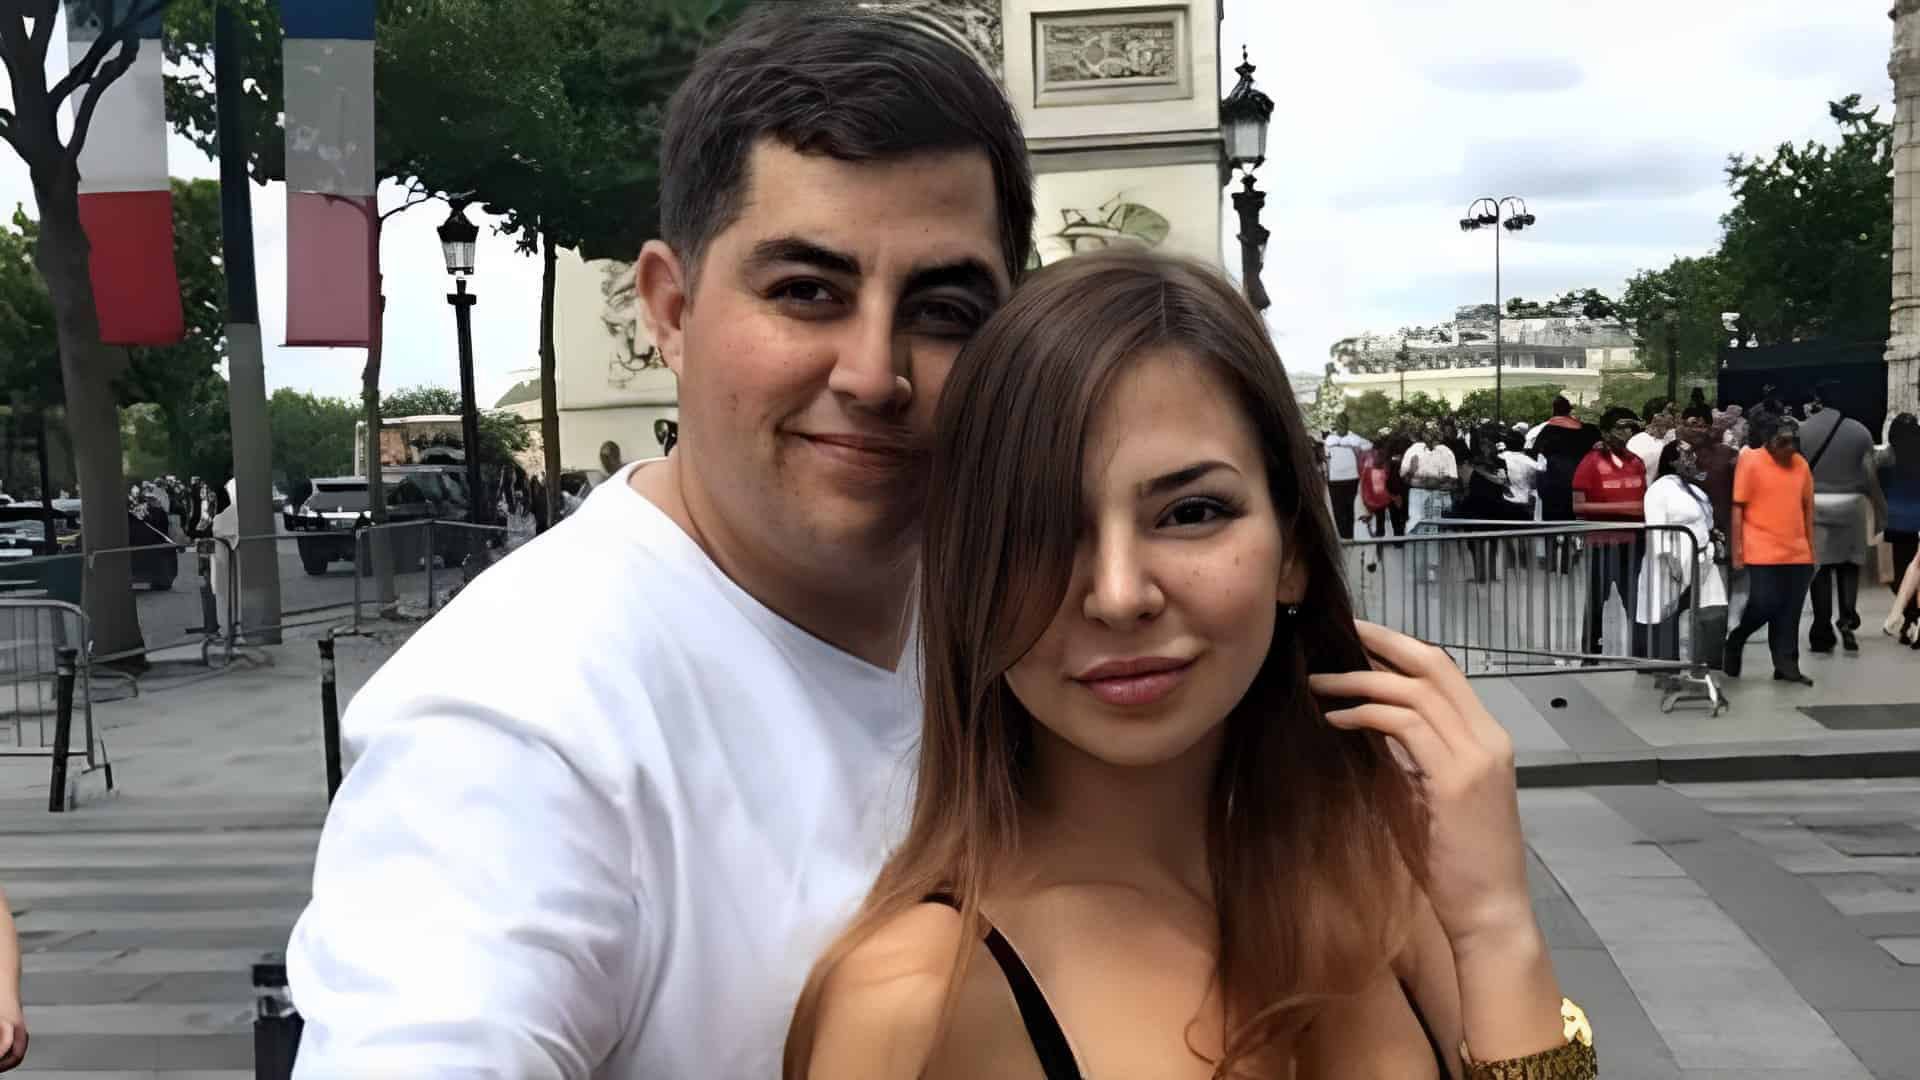 90 Day Fiancé: The Other Way Season 4 Episode 9 release date